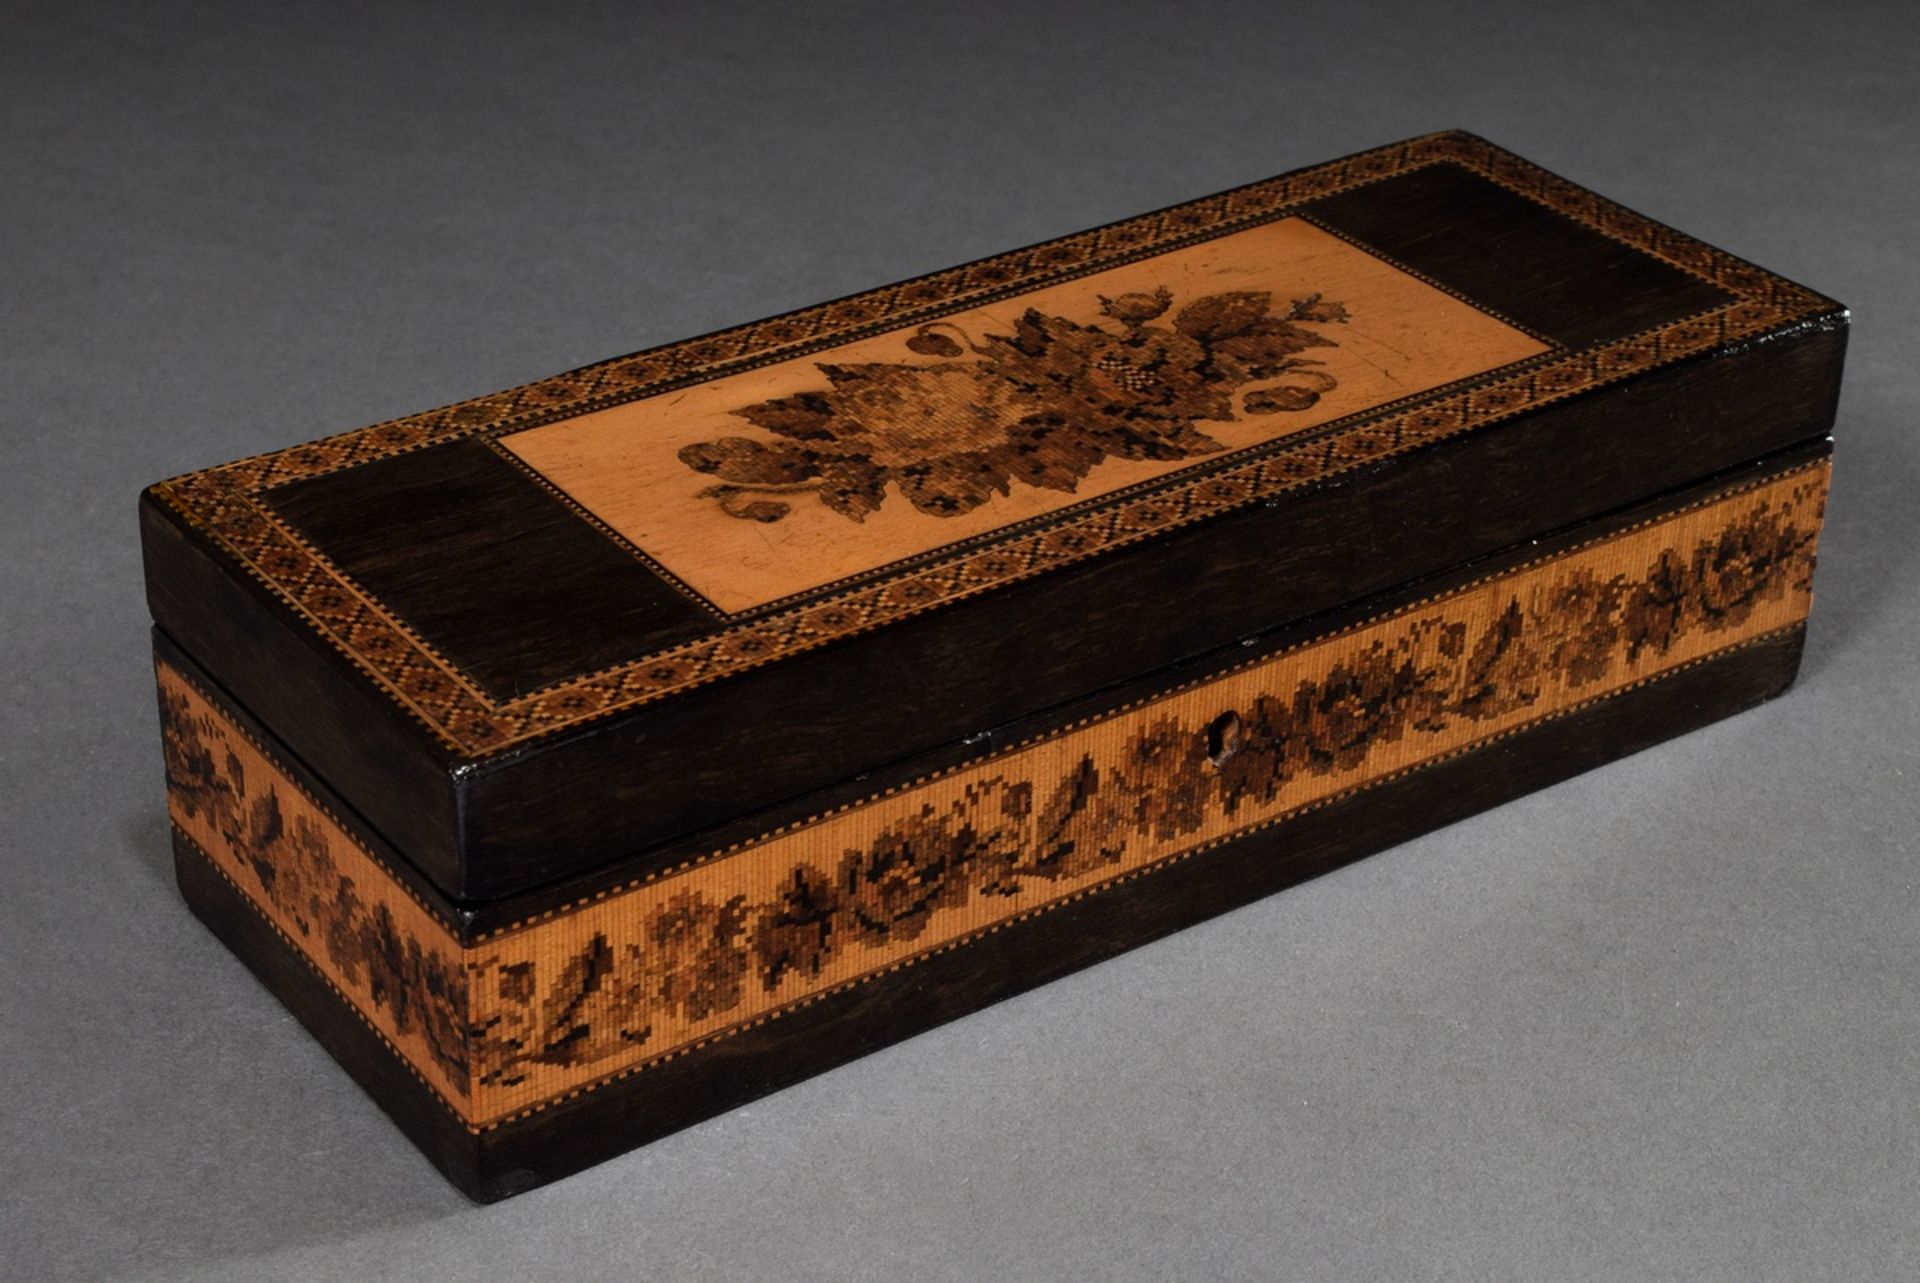 Rectangular "Tunbridge ware" casket with floral micromosaic of various woods, inside lined with apr